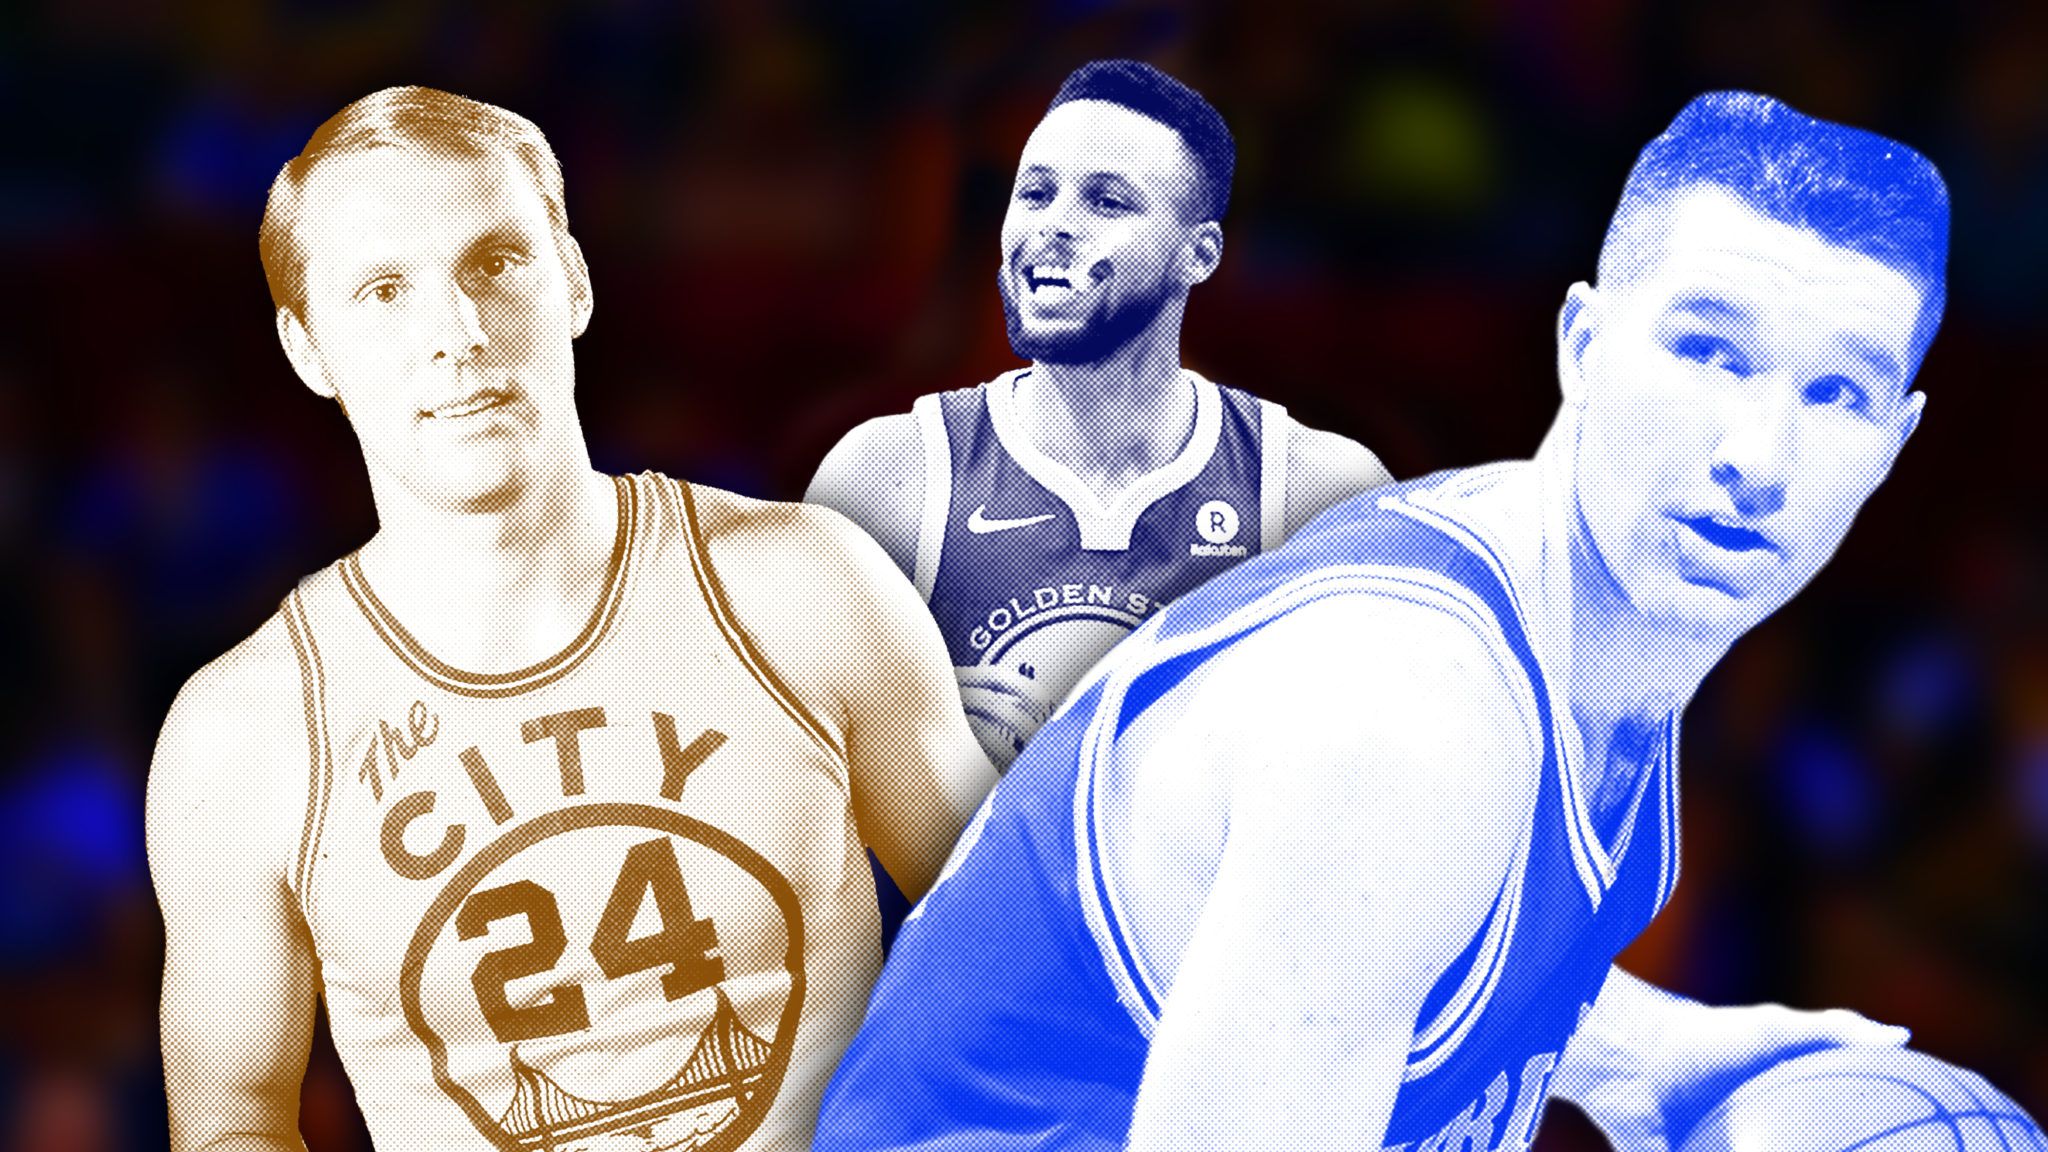 Stephen Curry ranks 2nd in Warriors players of all time